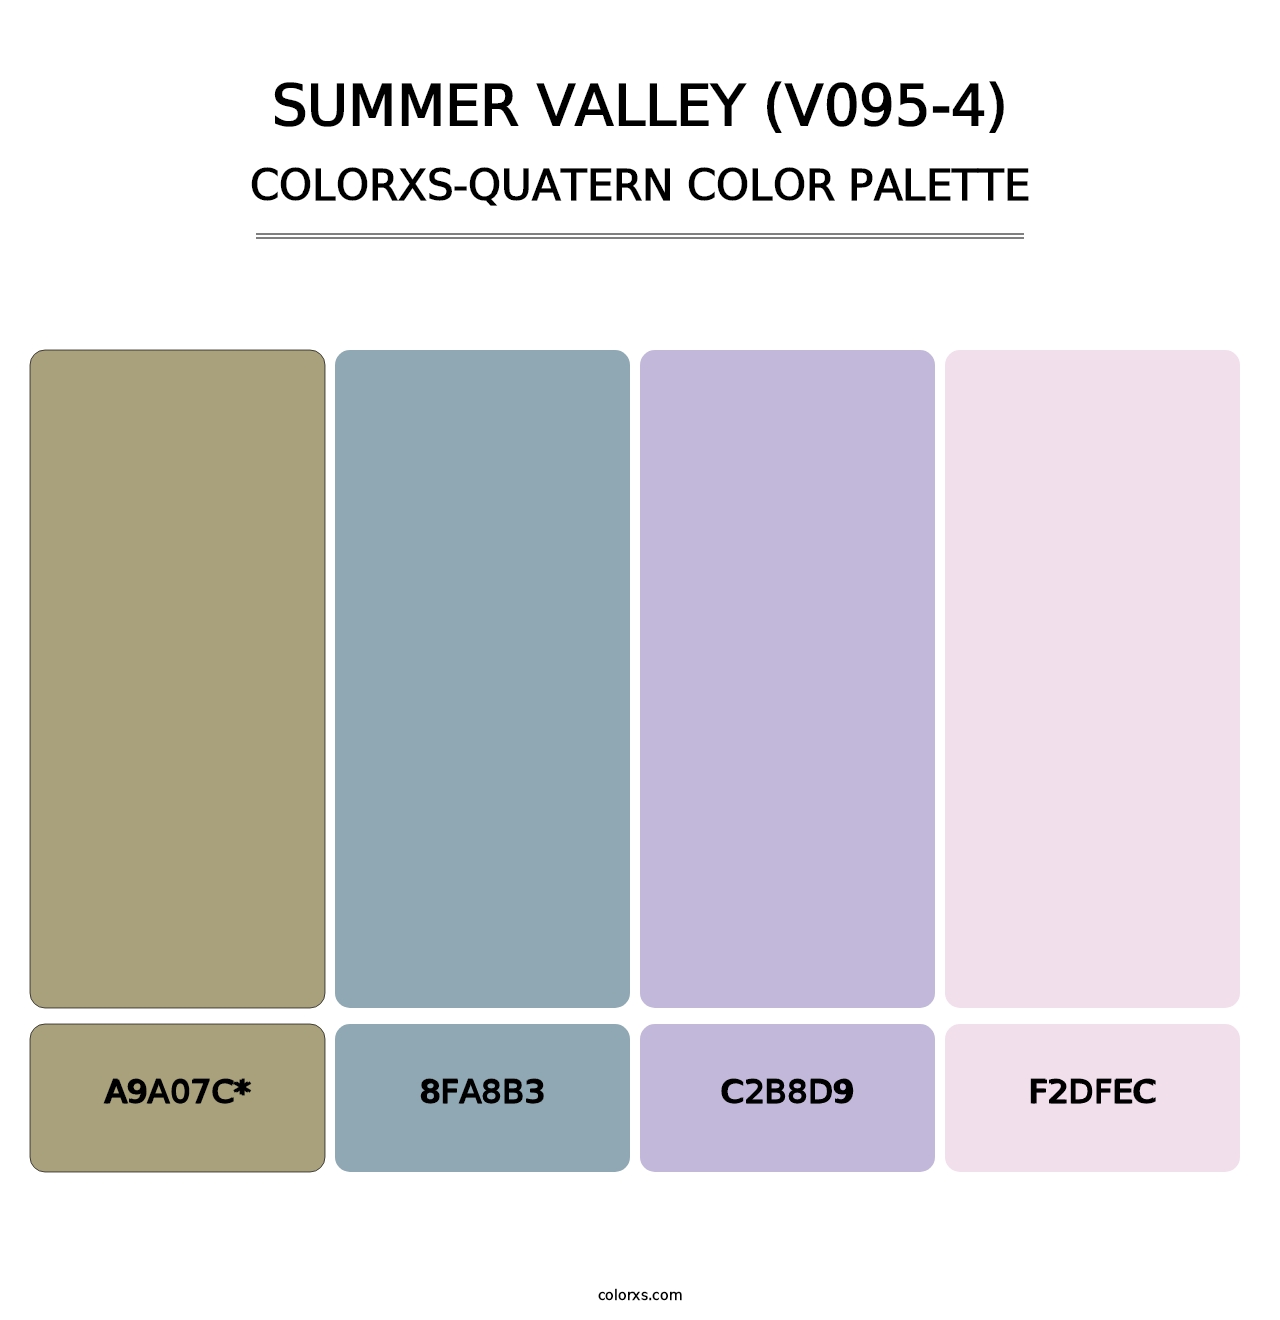 Summer Valley (V095-4) - Colorxs Quatern Palette